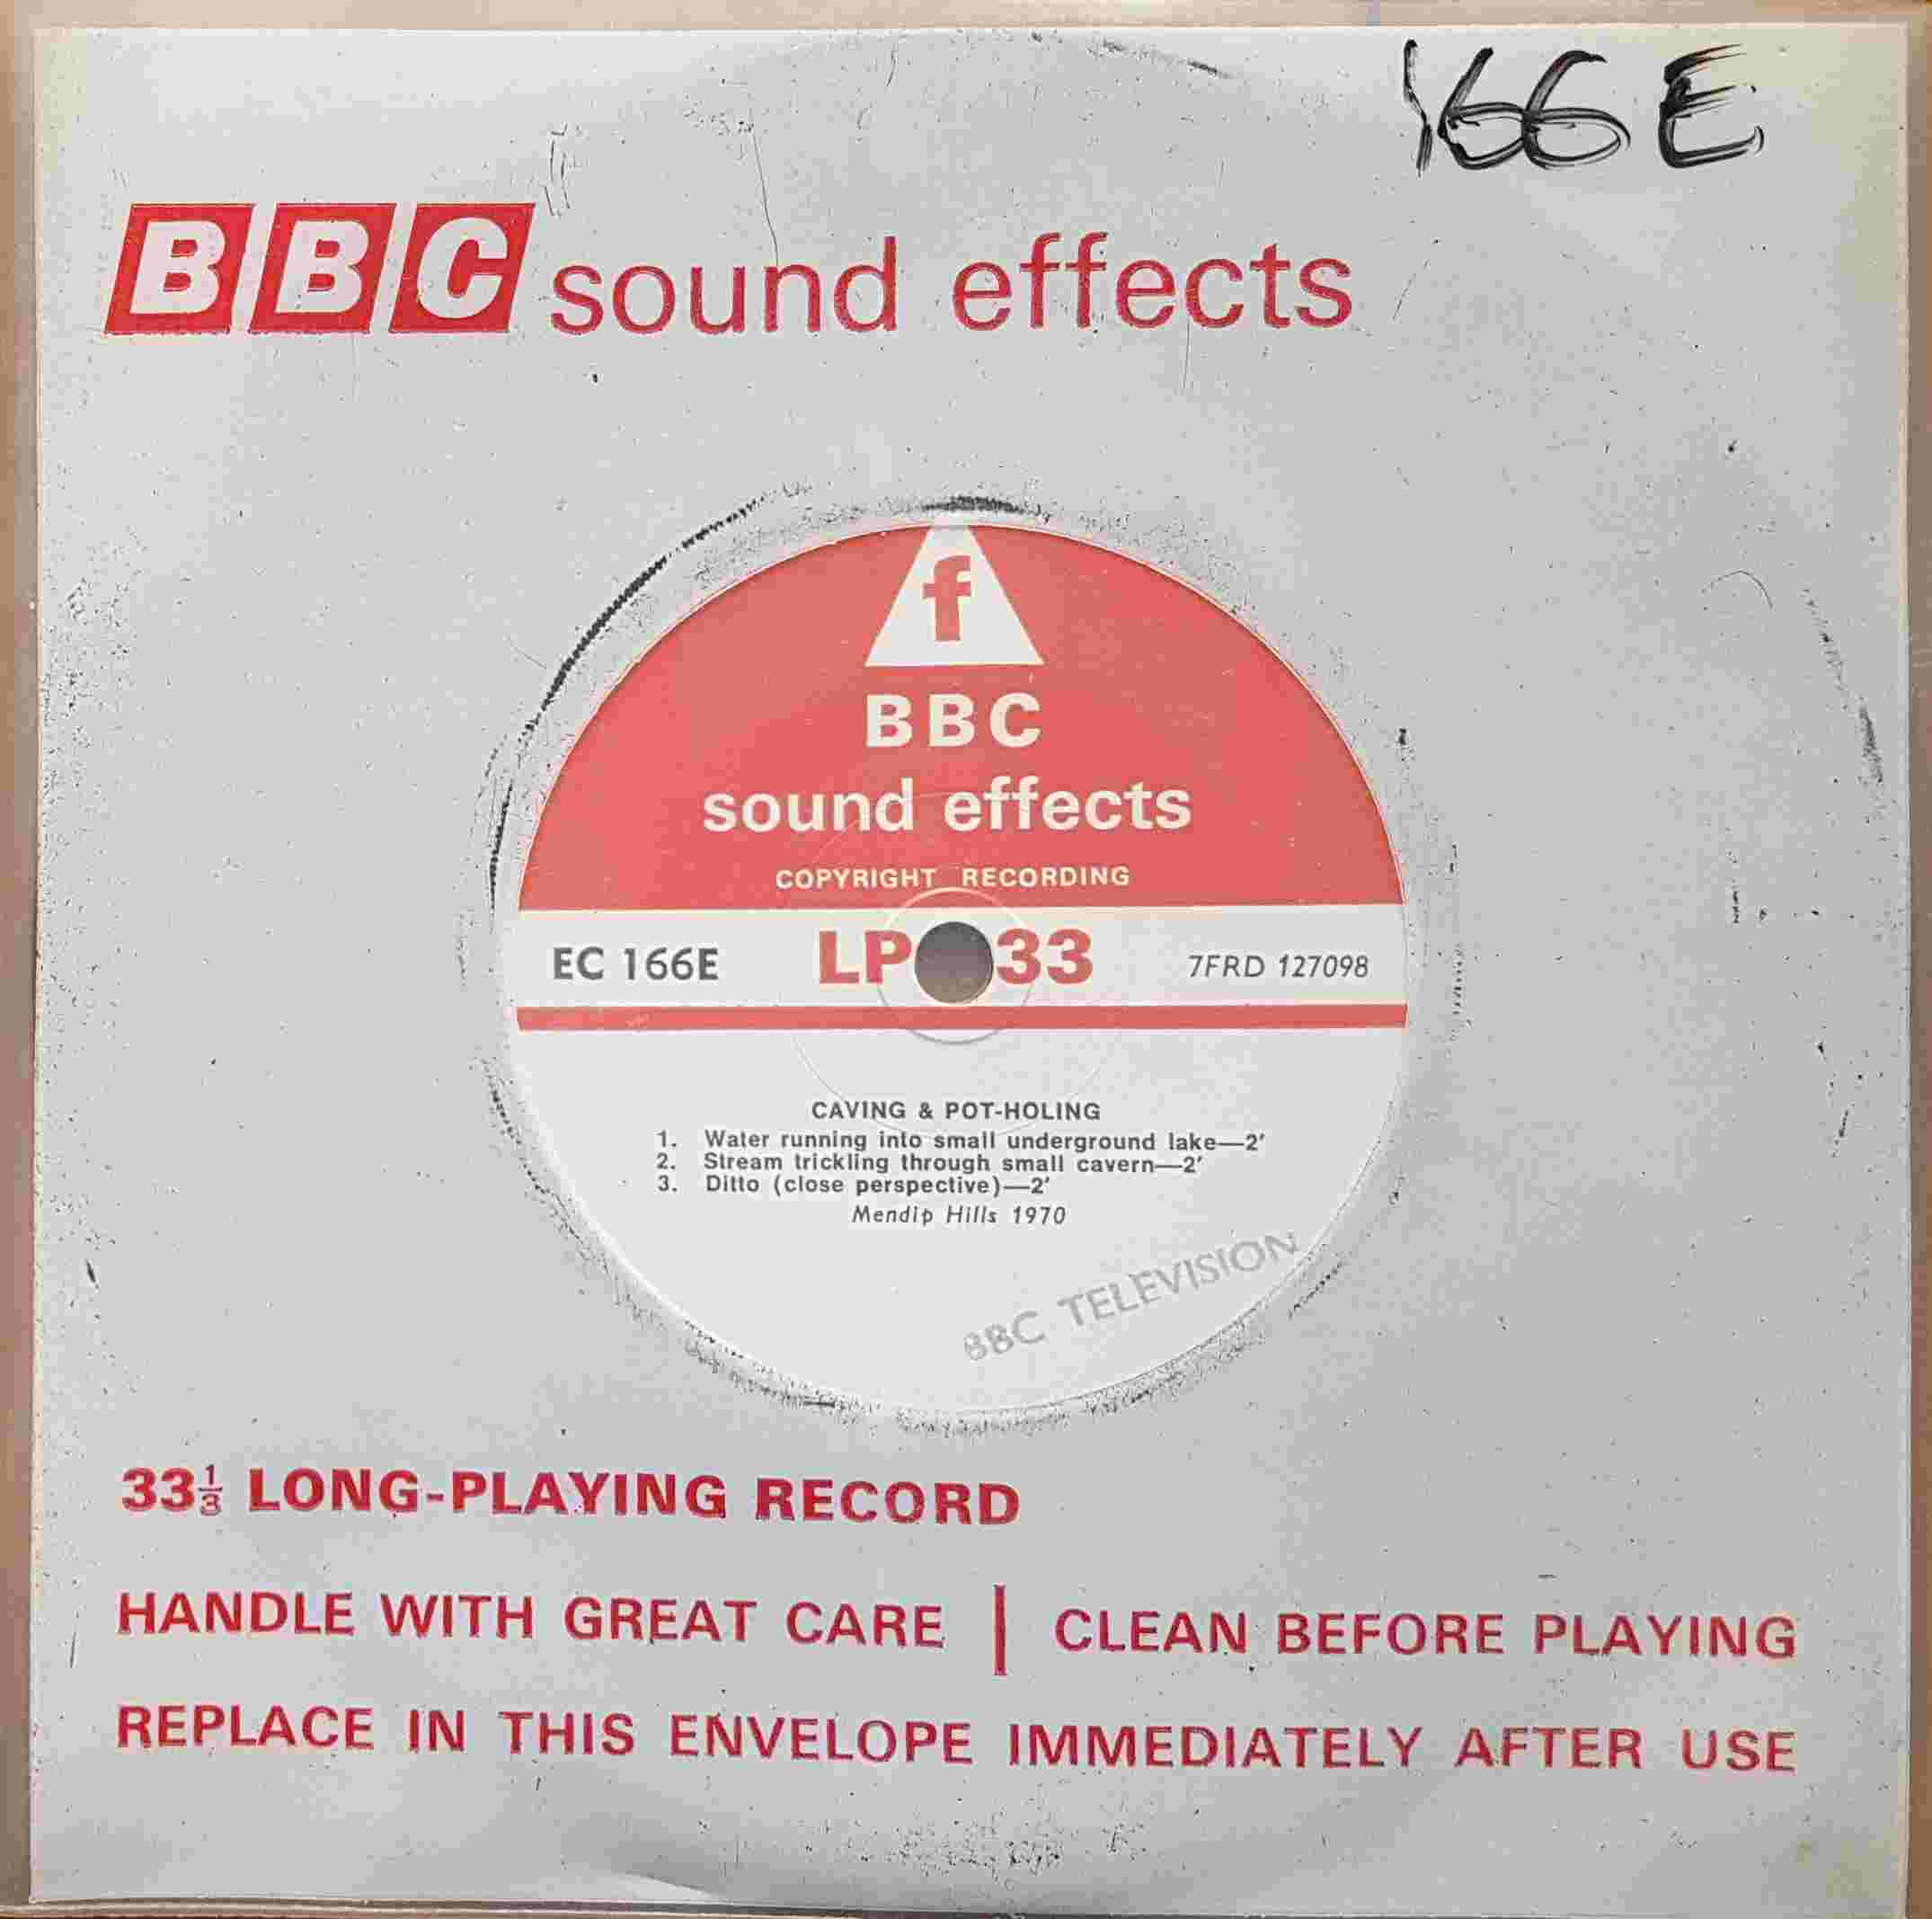 Picture of EC 166E Caving & pot-holing by artist Not registered from the BBC records and Tapes library